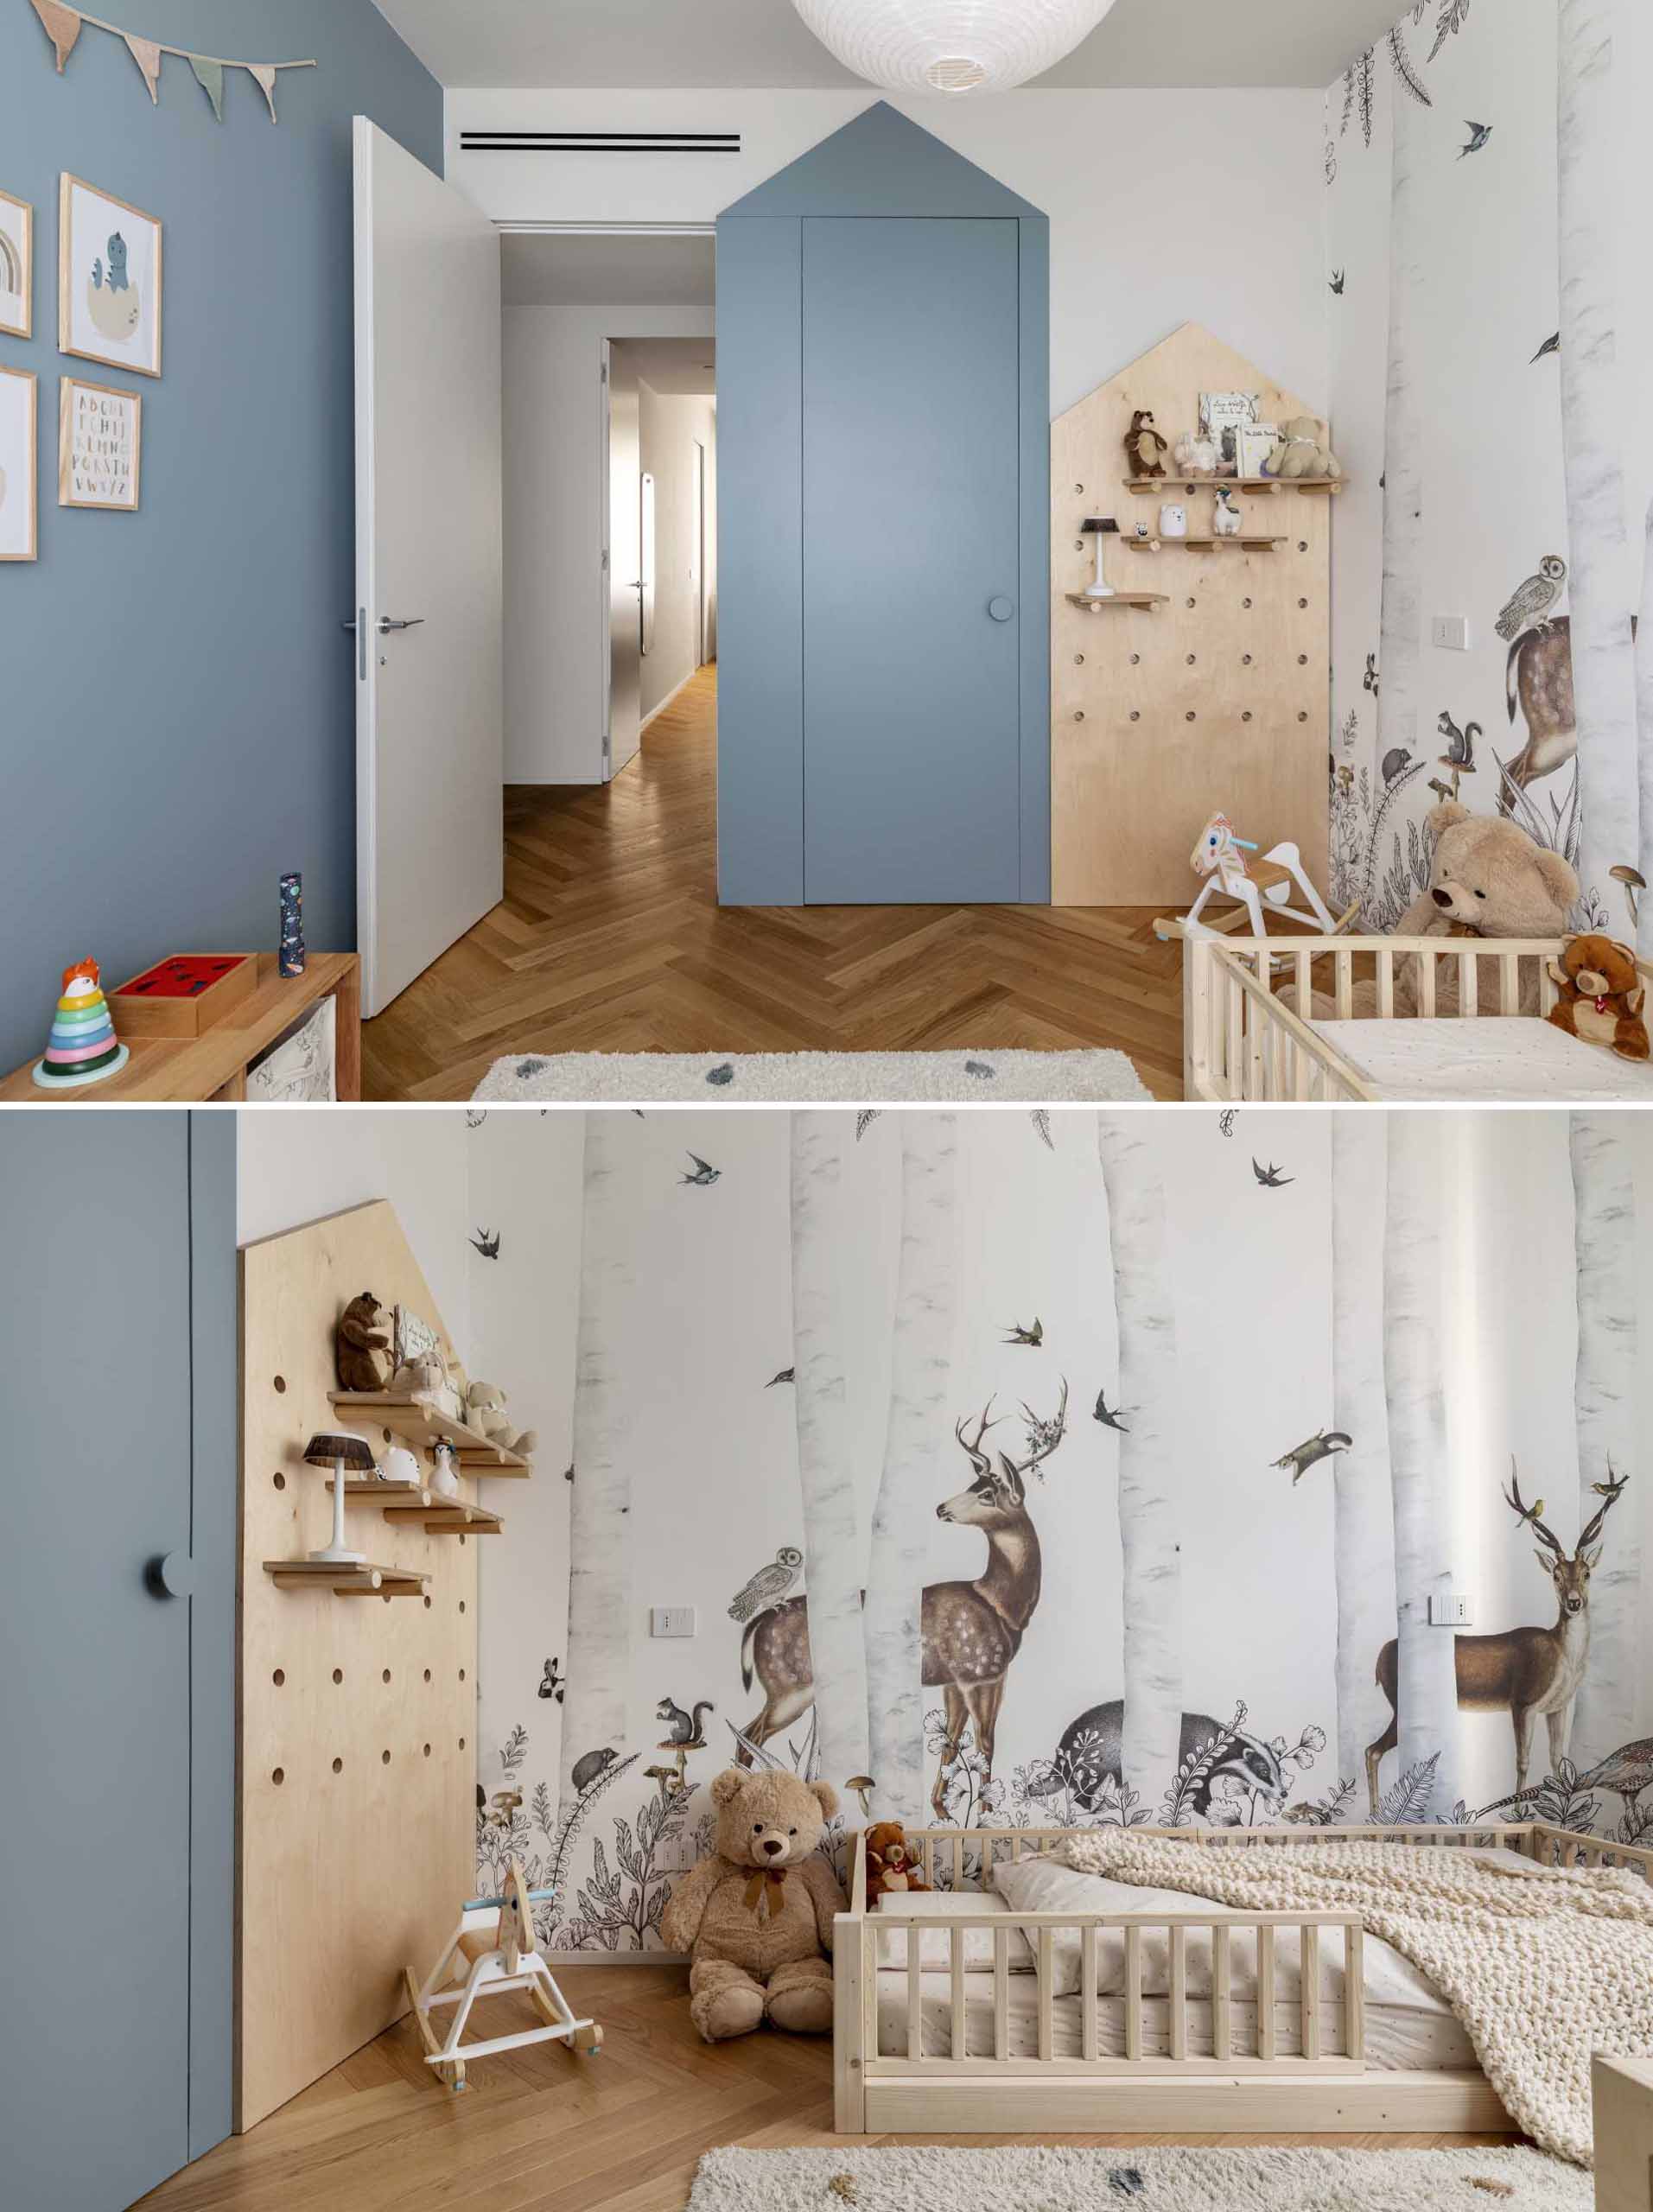 In a child's bedroom, a soft dusty blue has been used to create a contemporary and fun look that also includes a walk-in closet, a pegboard wall with shelves, and a woodland mural.